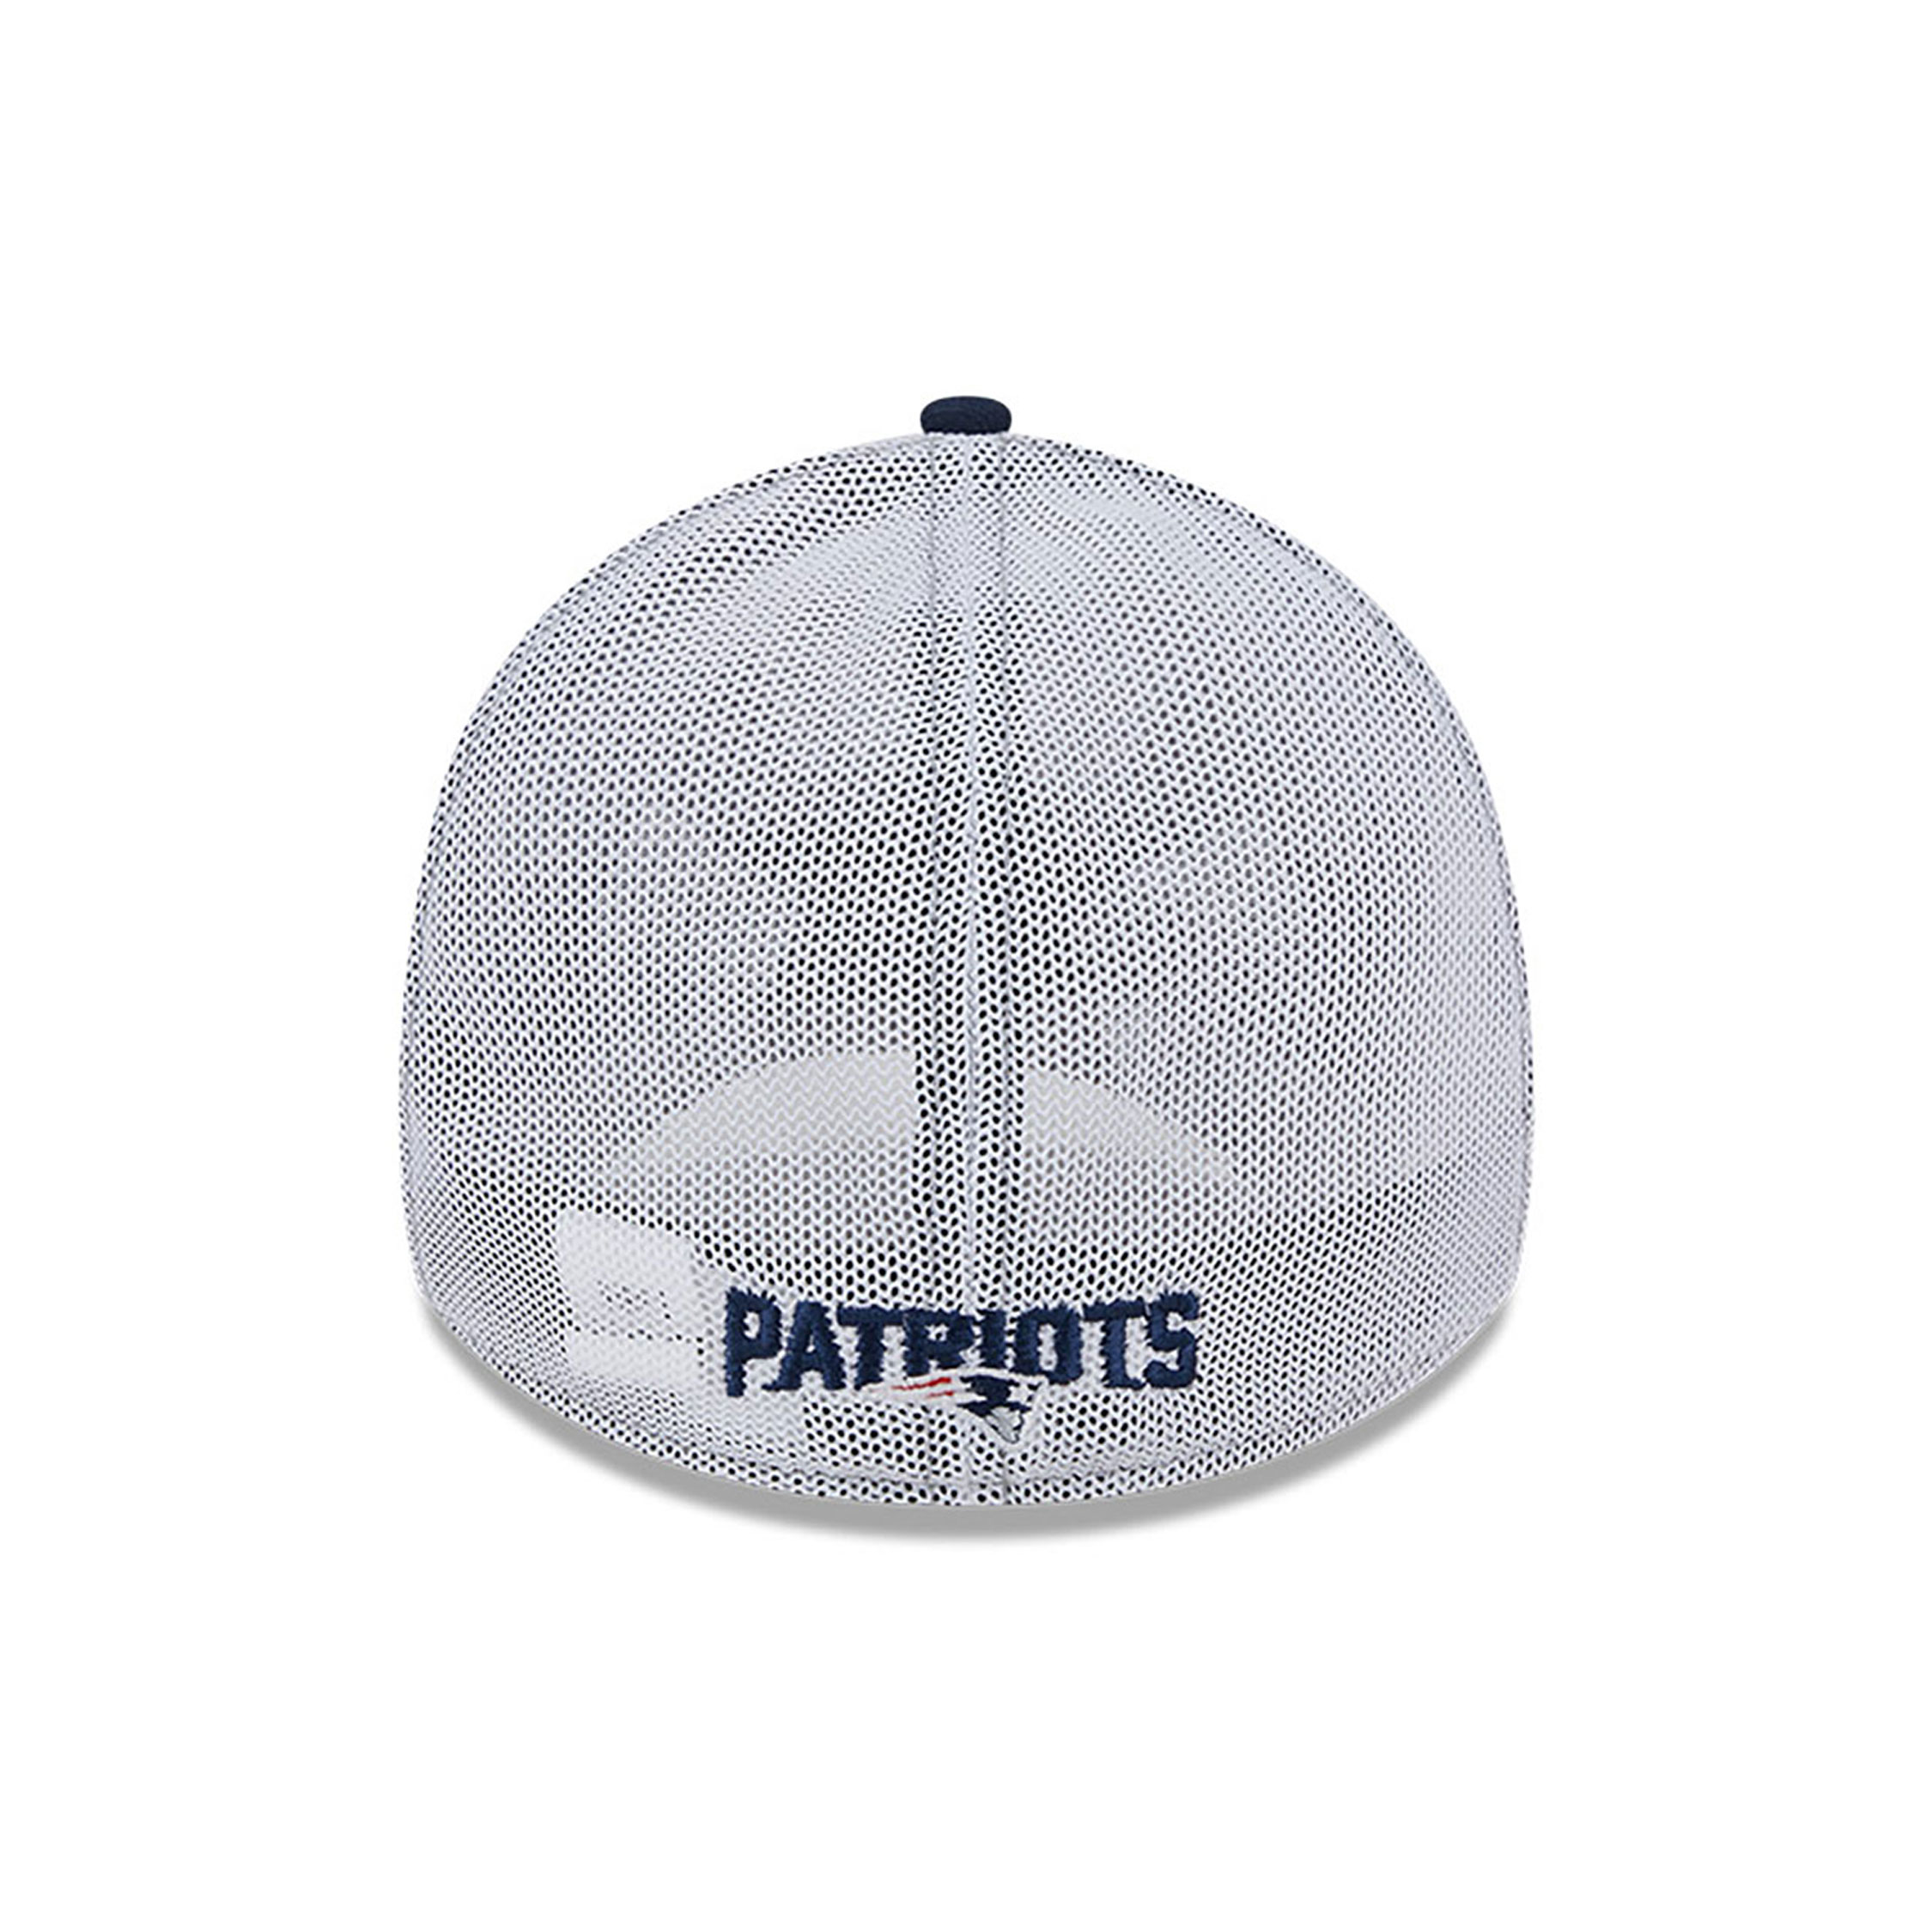 New England Patriots NFL White 39THIRTY Stretch Fit Cap